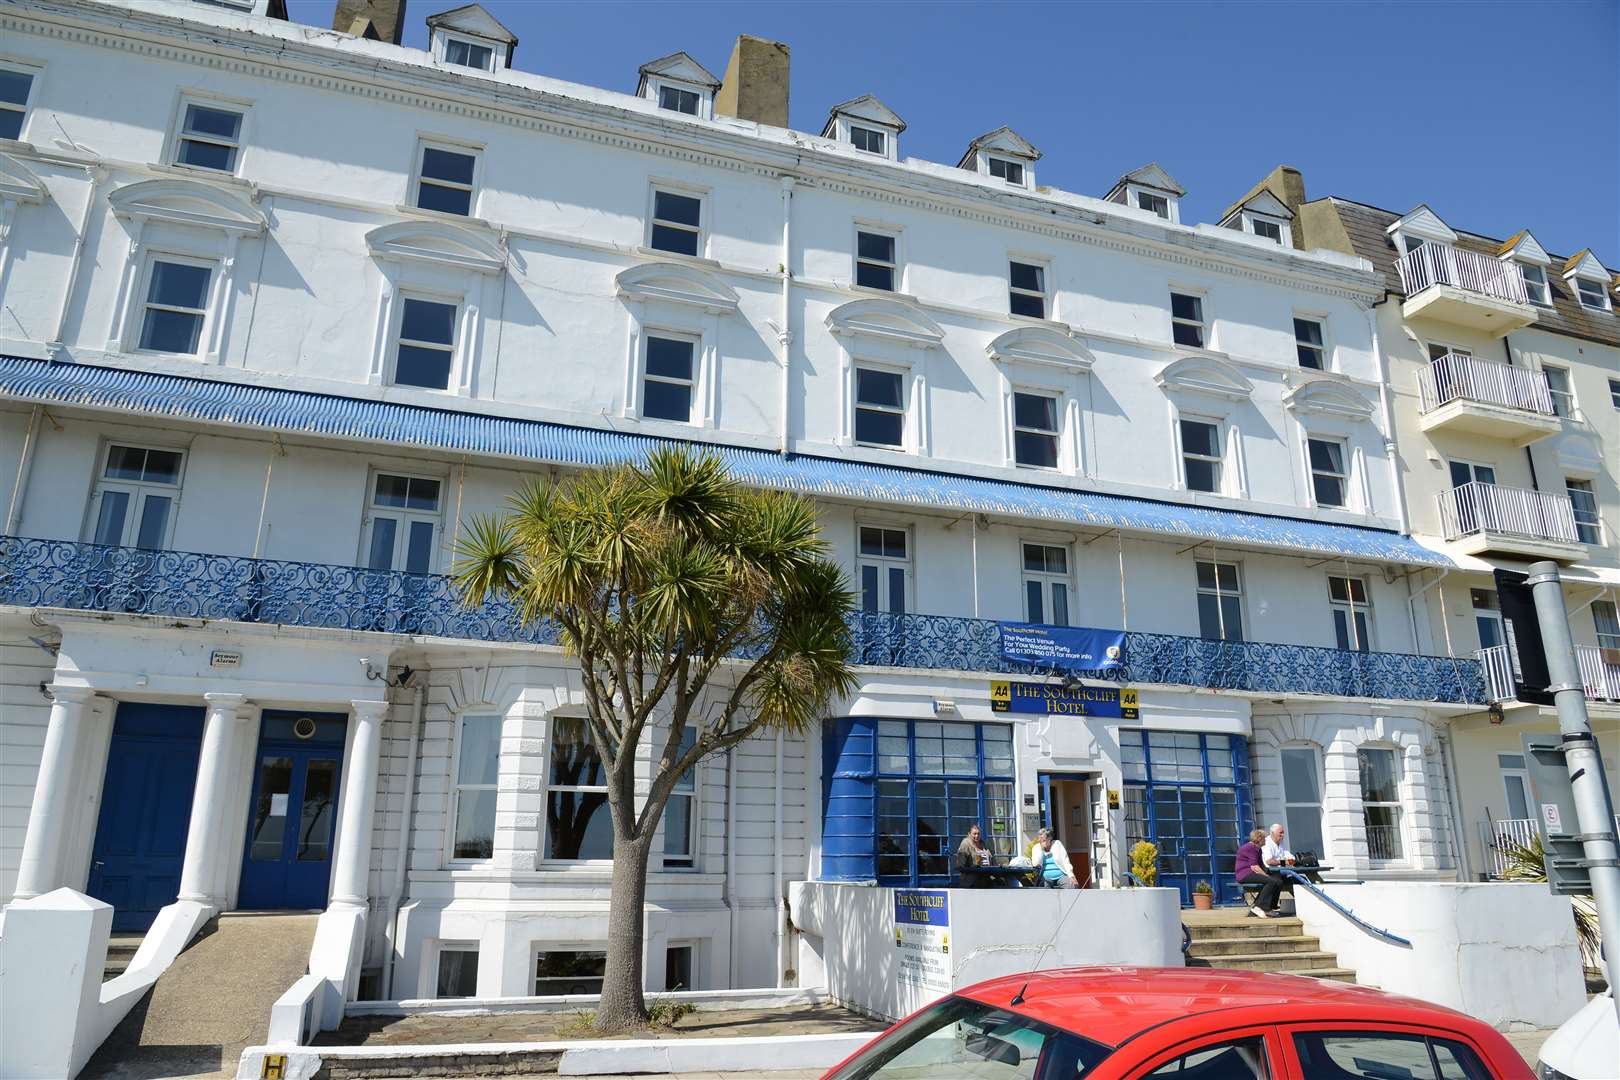 The Southcliff Hotel in Folkestone is one site being used by the Home Office